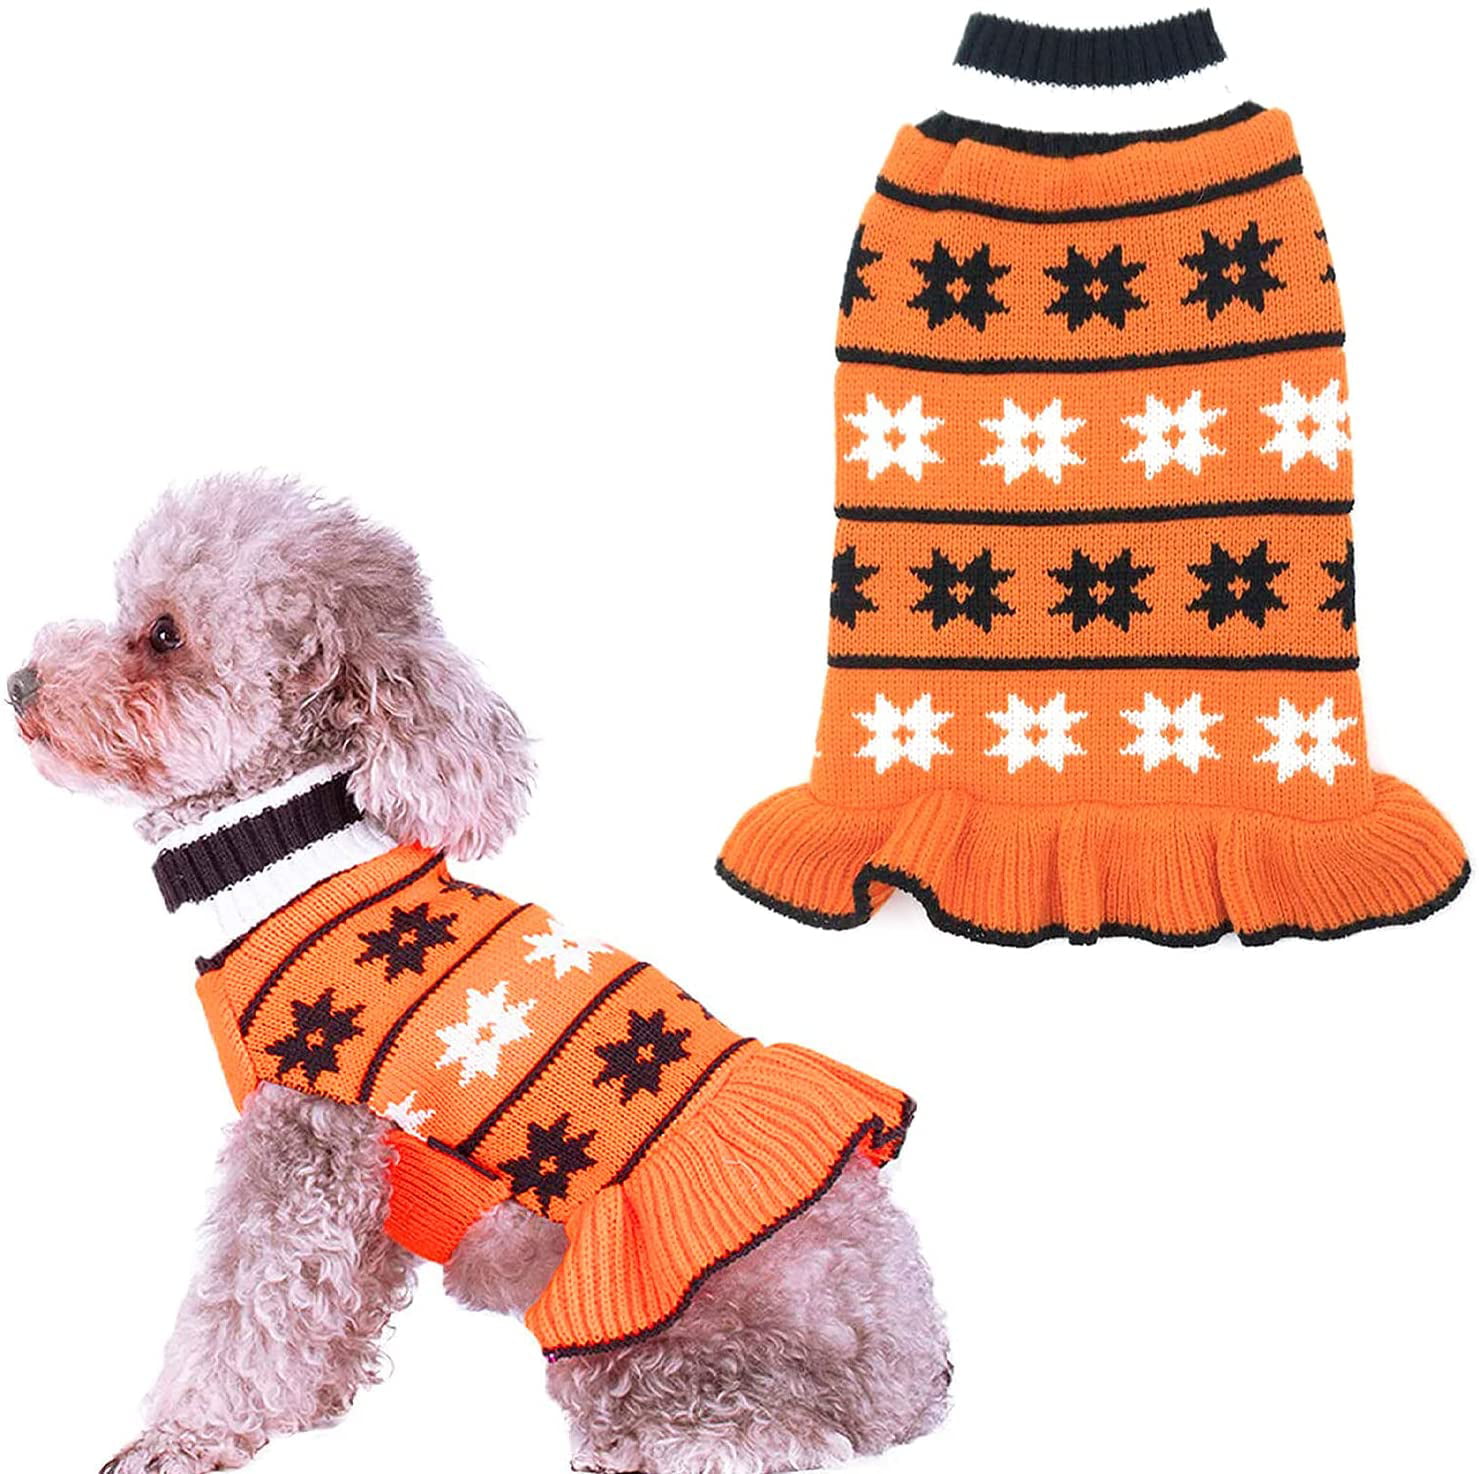 kyeese Dog Sweater Dress Plaid with Bowtie Turtleneck Dog Pullover Knitwear Pet Sweater for Fall Winter 